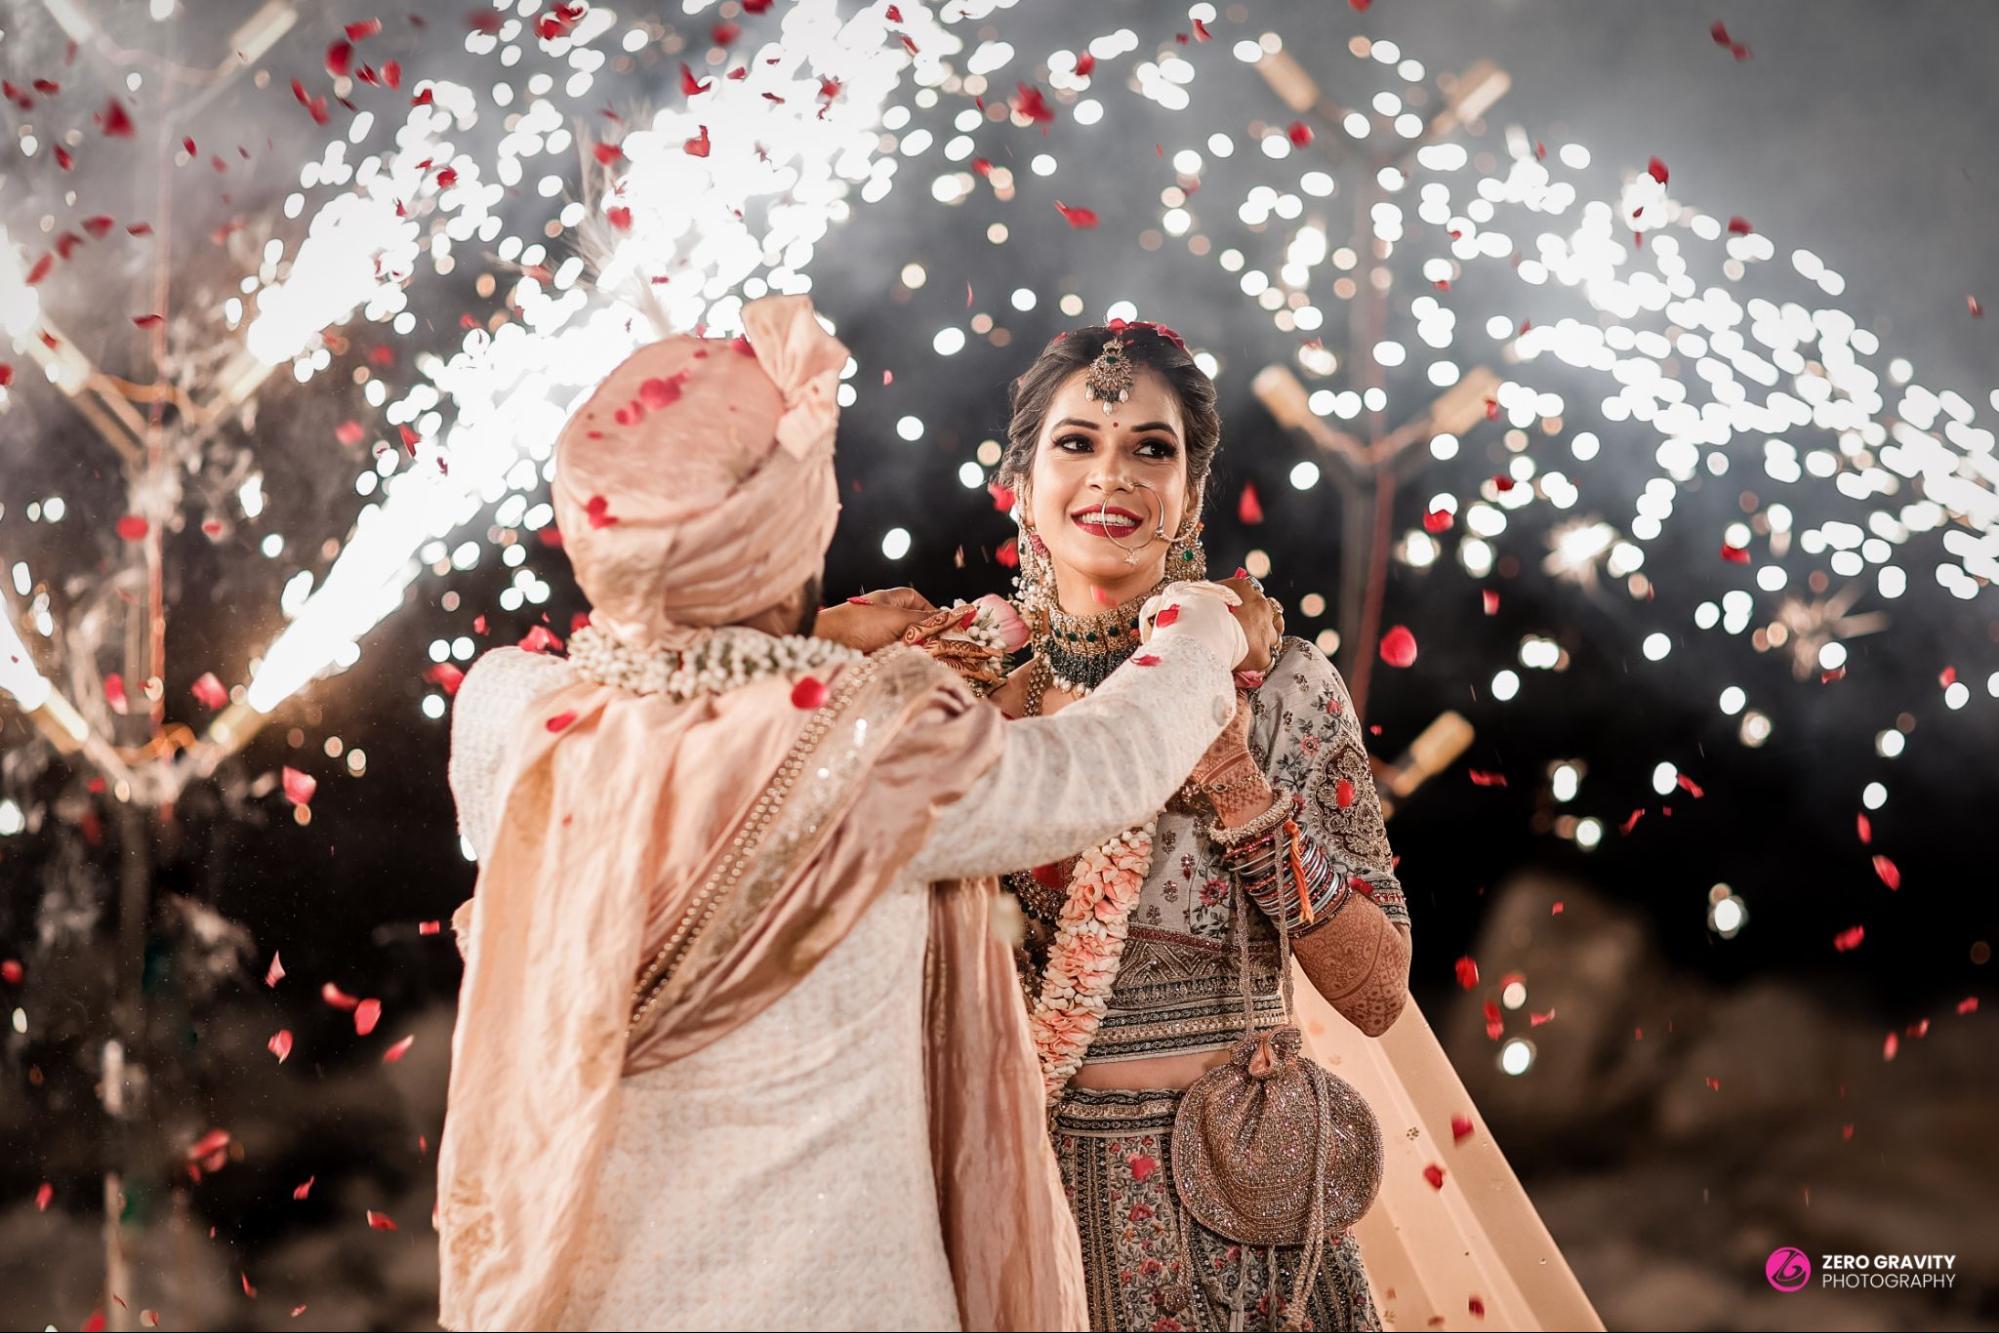 The Art Of Capturing The Emotions In Wedding Photography